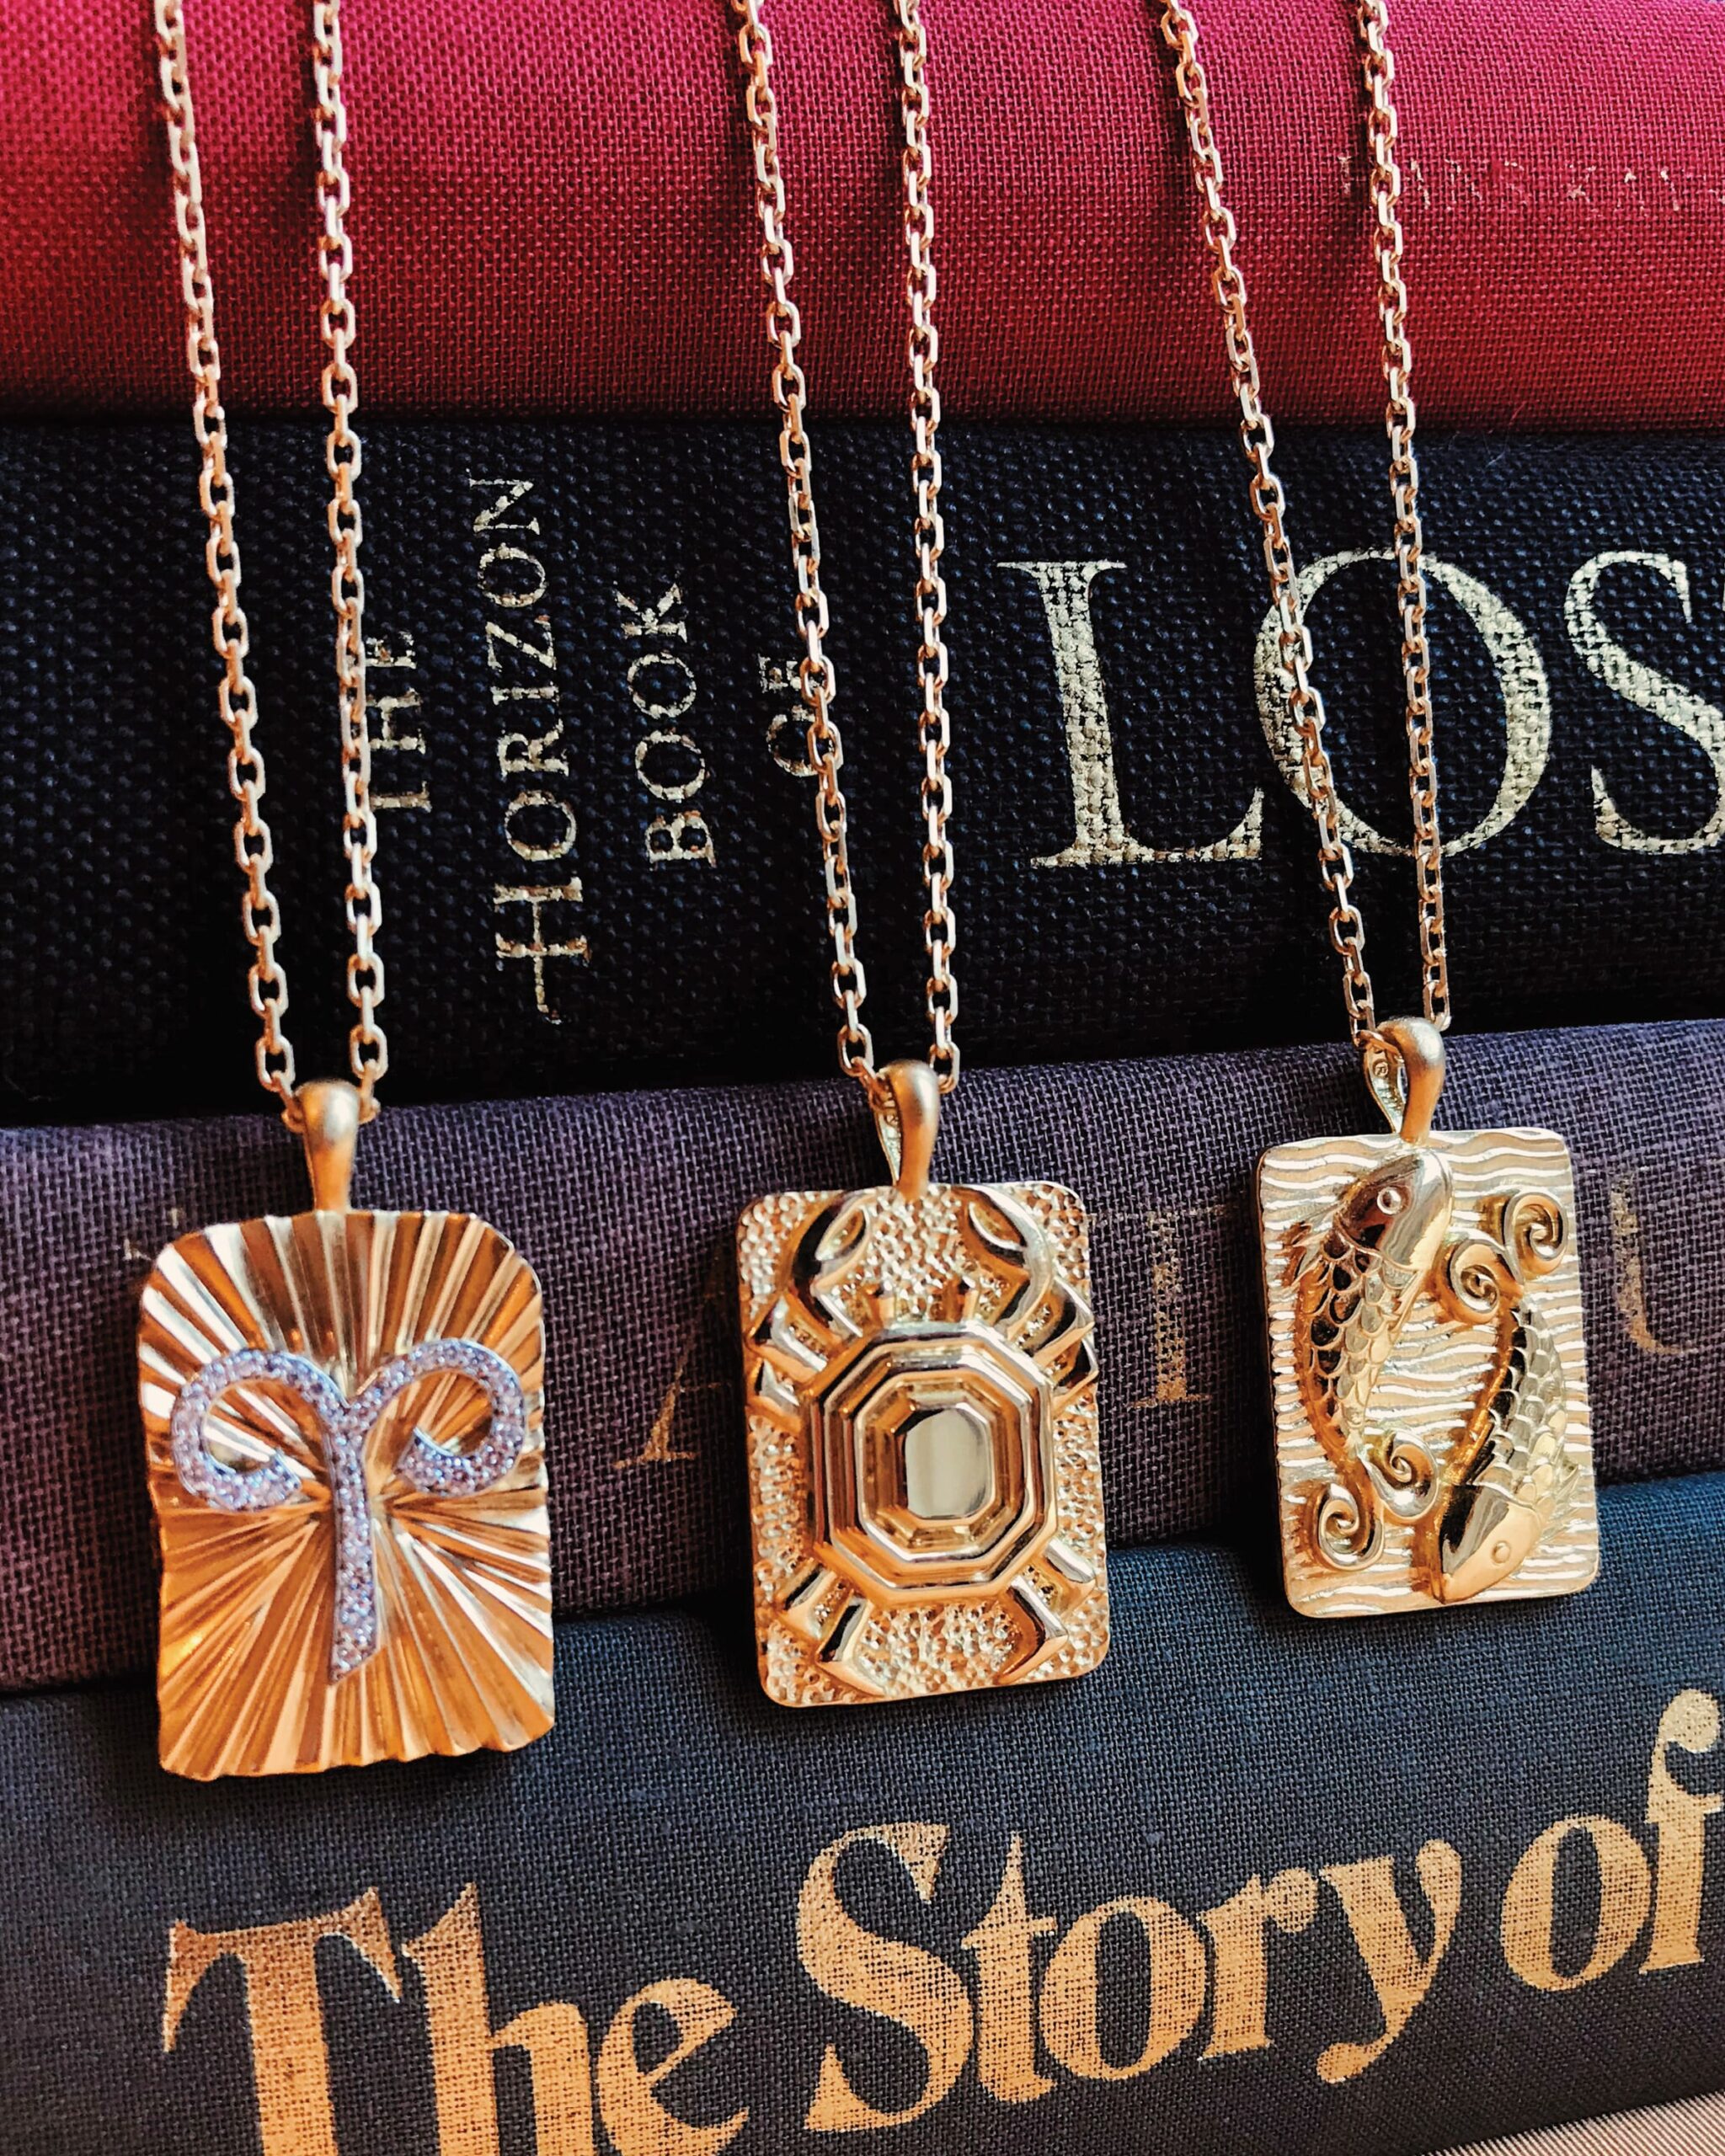 Zodiac necklaces from David Webb featuring carved gold and studded diamond zodiac pendants